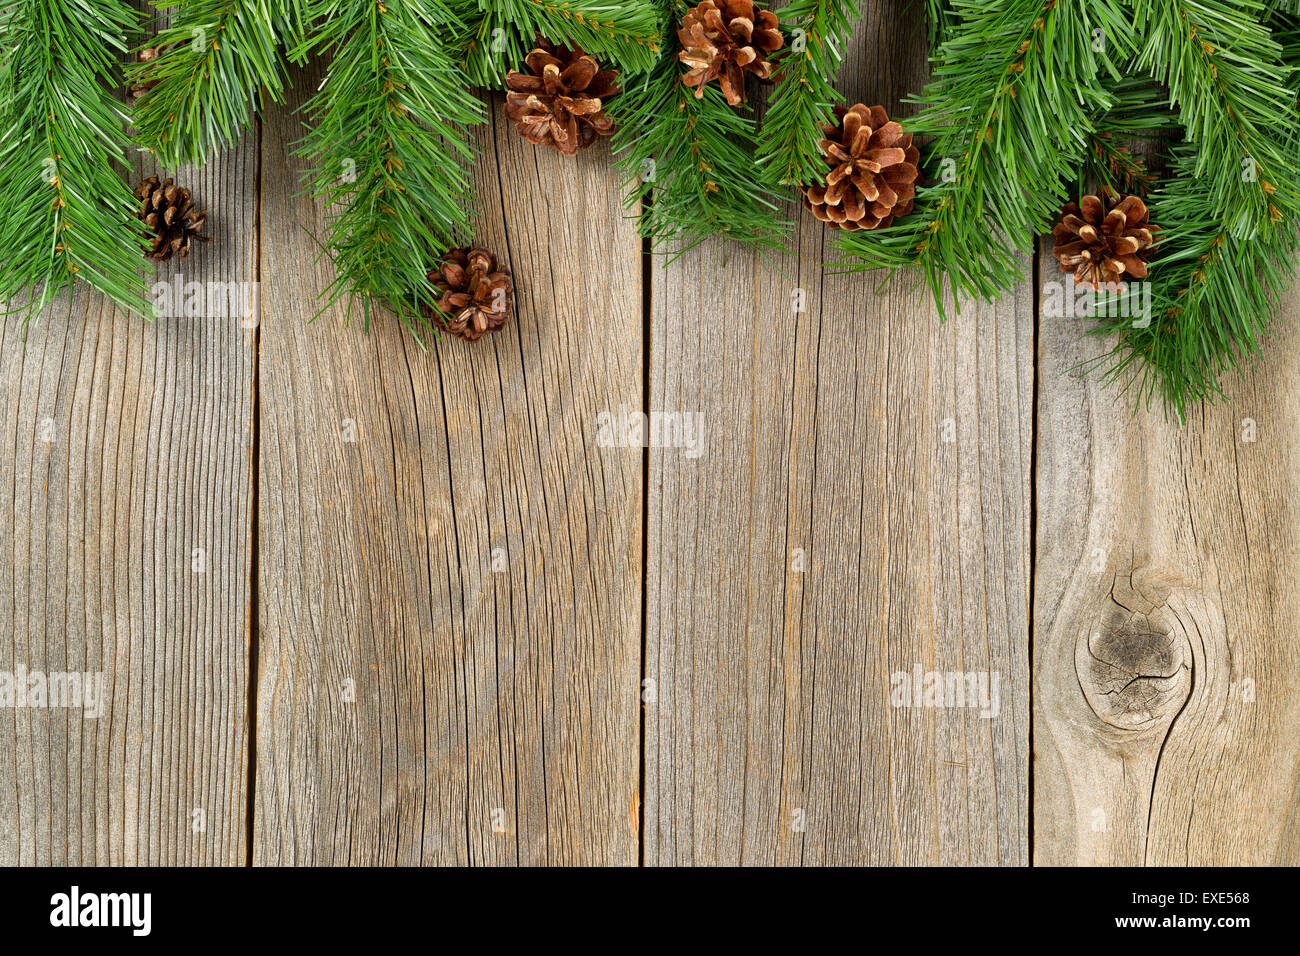 Christmas border with pine tree branches and cones on rustic wooden boards. Stock Photo